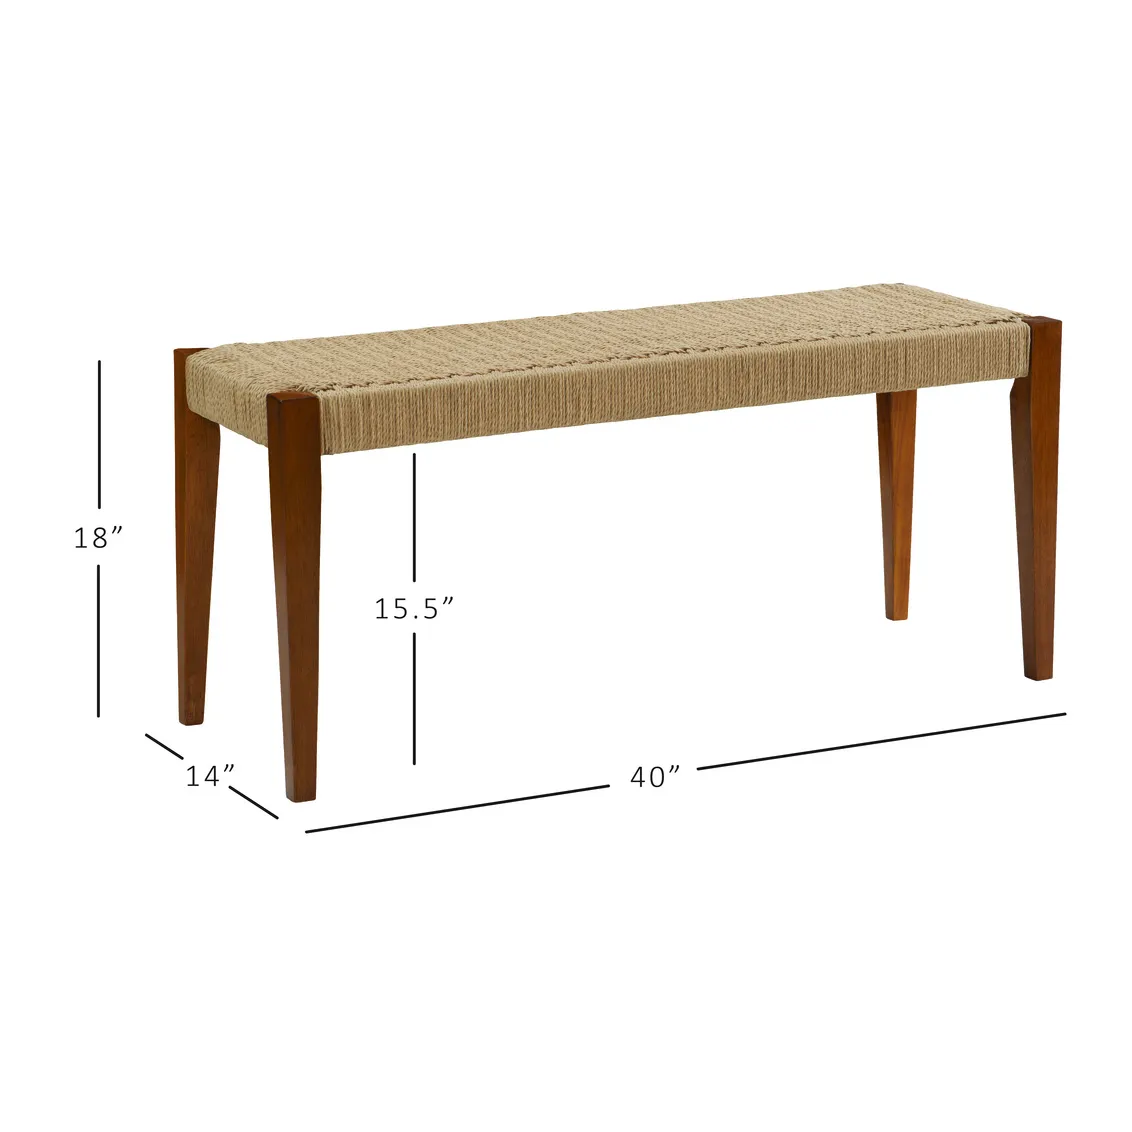 CADENCE DINING BENCH - BROWN